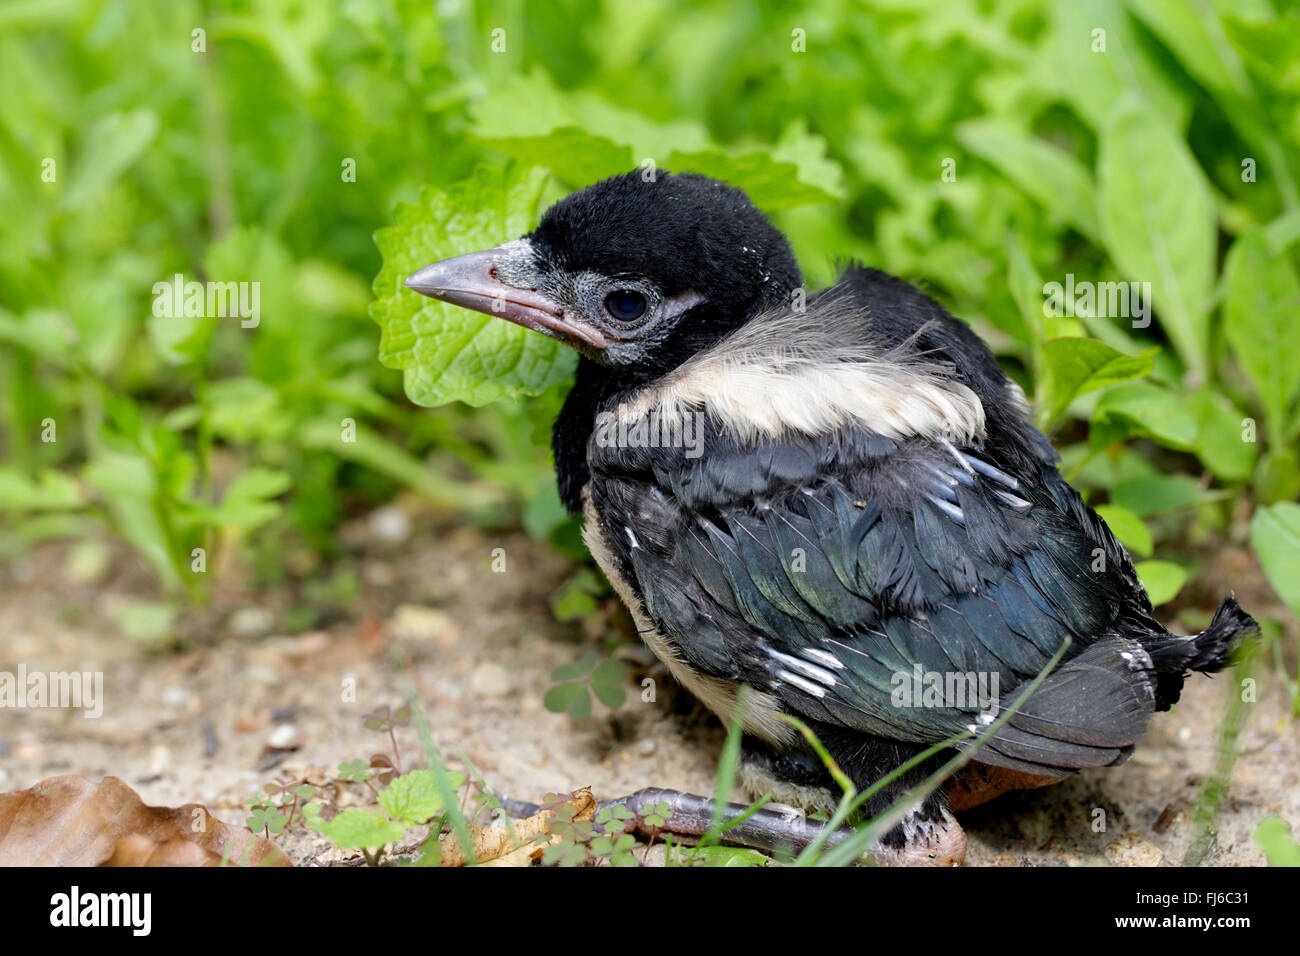 black-billed magpie (Pica pica), young bird sitting on the ground, nestling, Germany, Bavaria Stock Photo